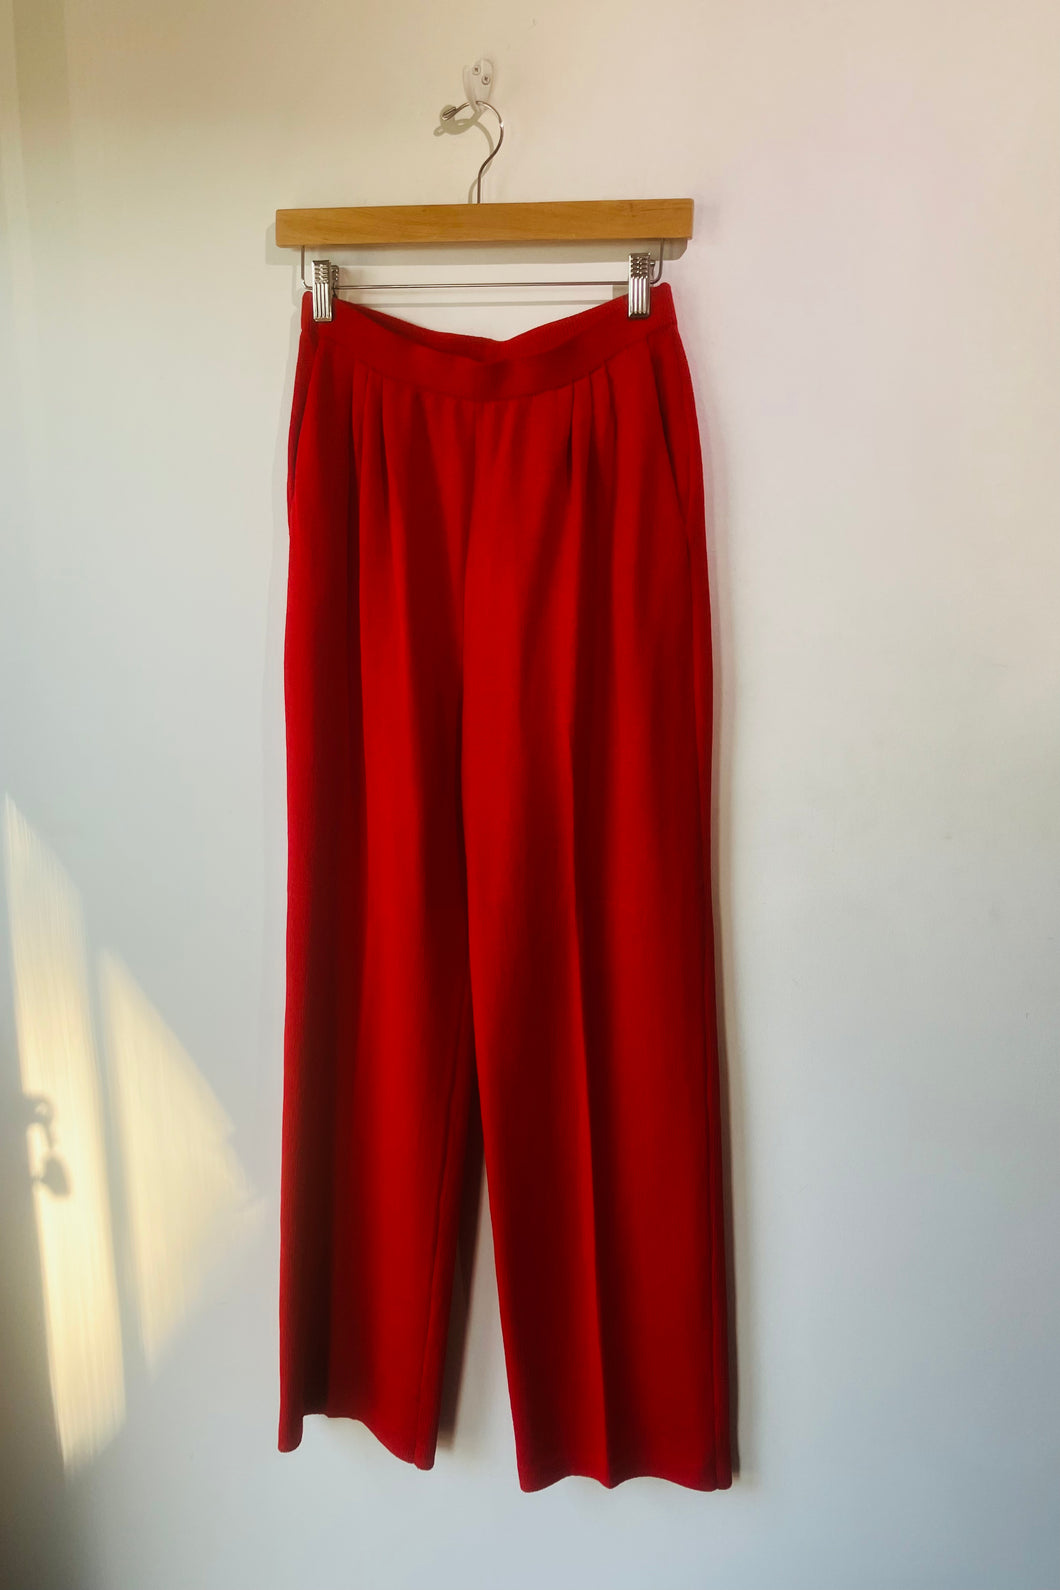 Red Knit Pants